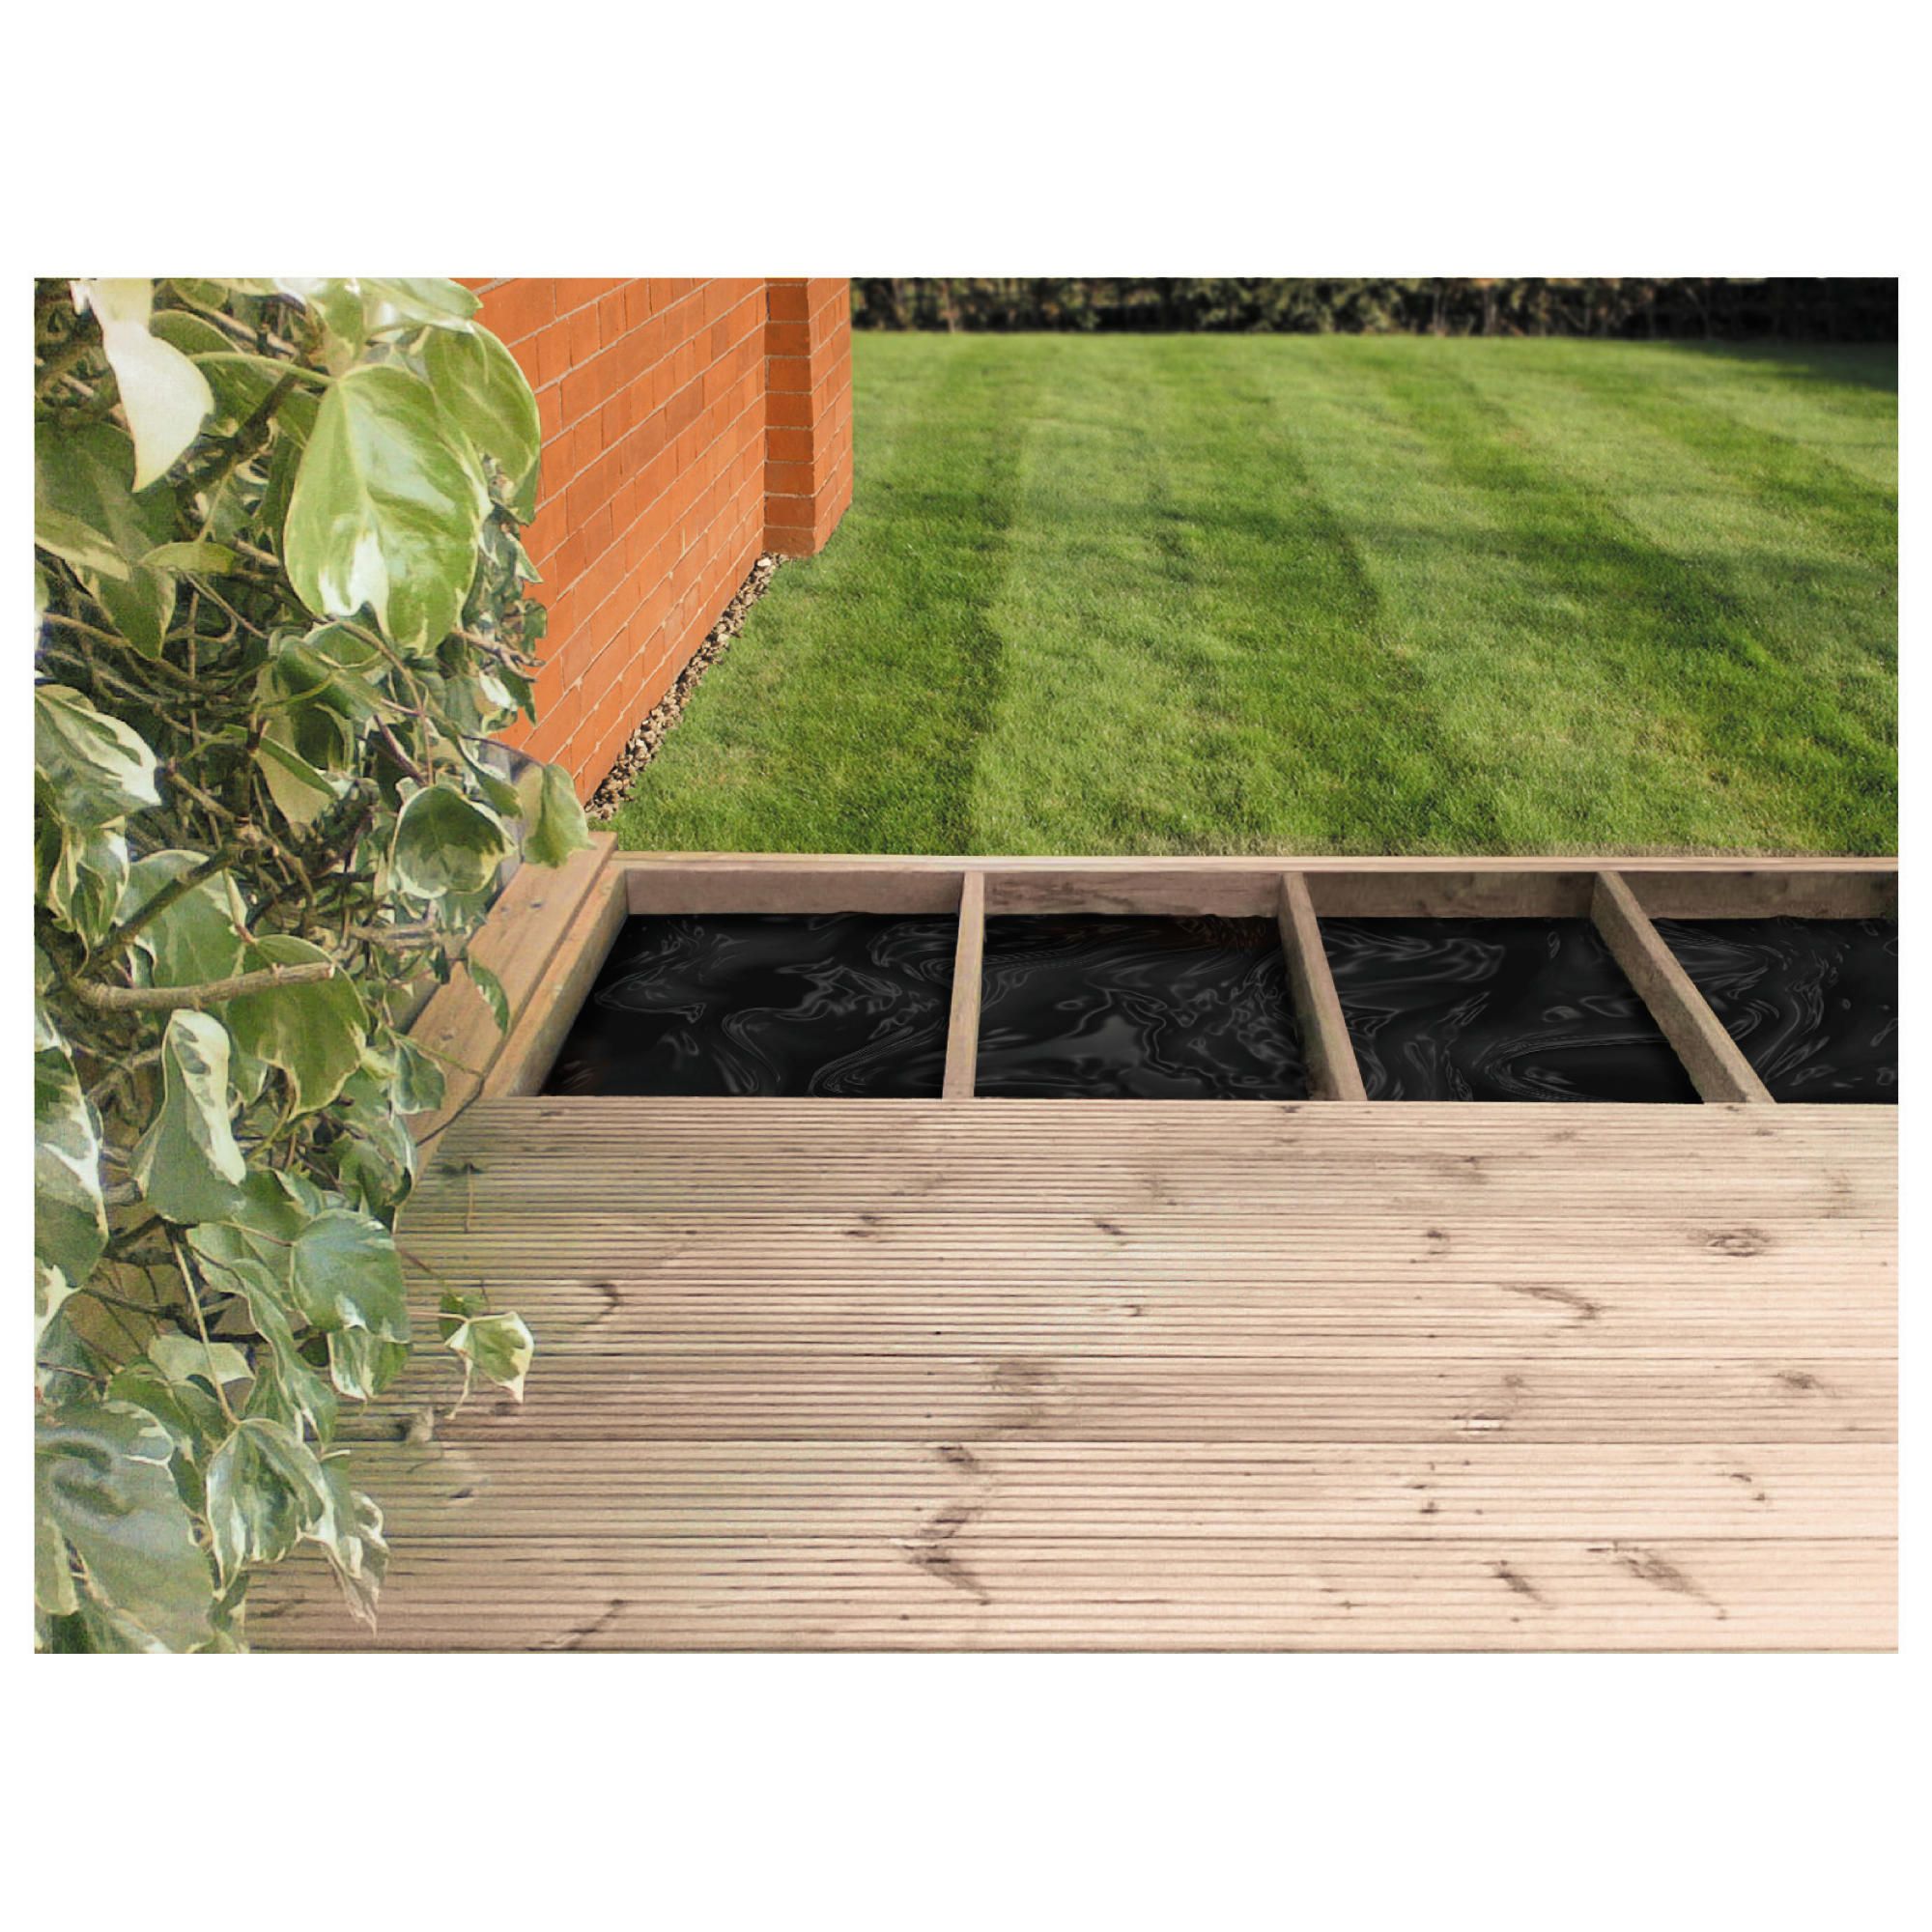 Finnlife Deck and Joist Pack (3.6mx4.8m) at Tesco Direct